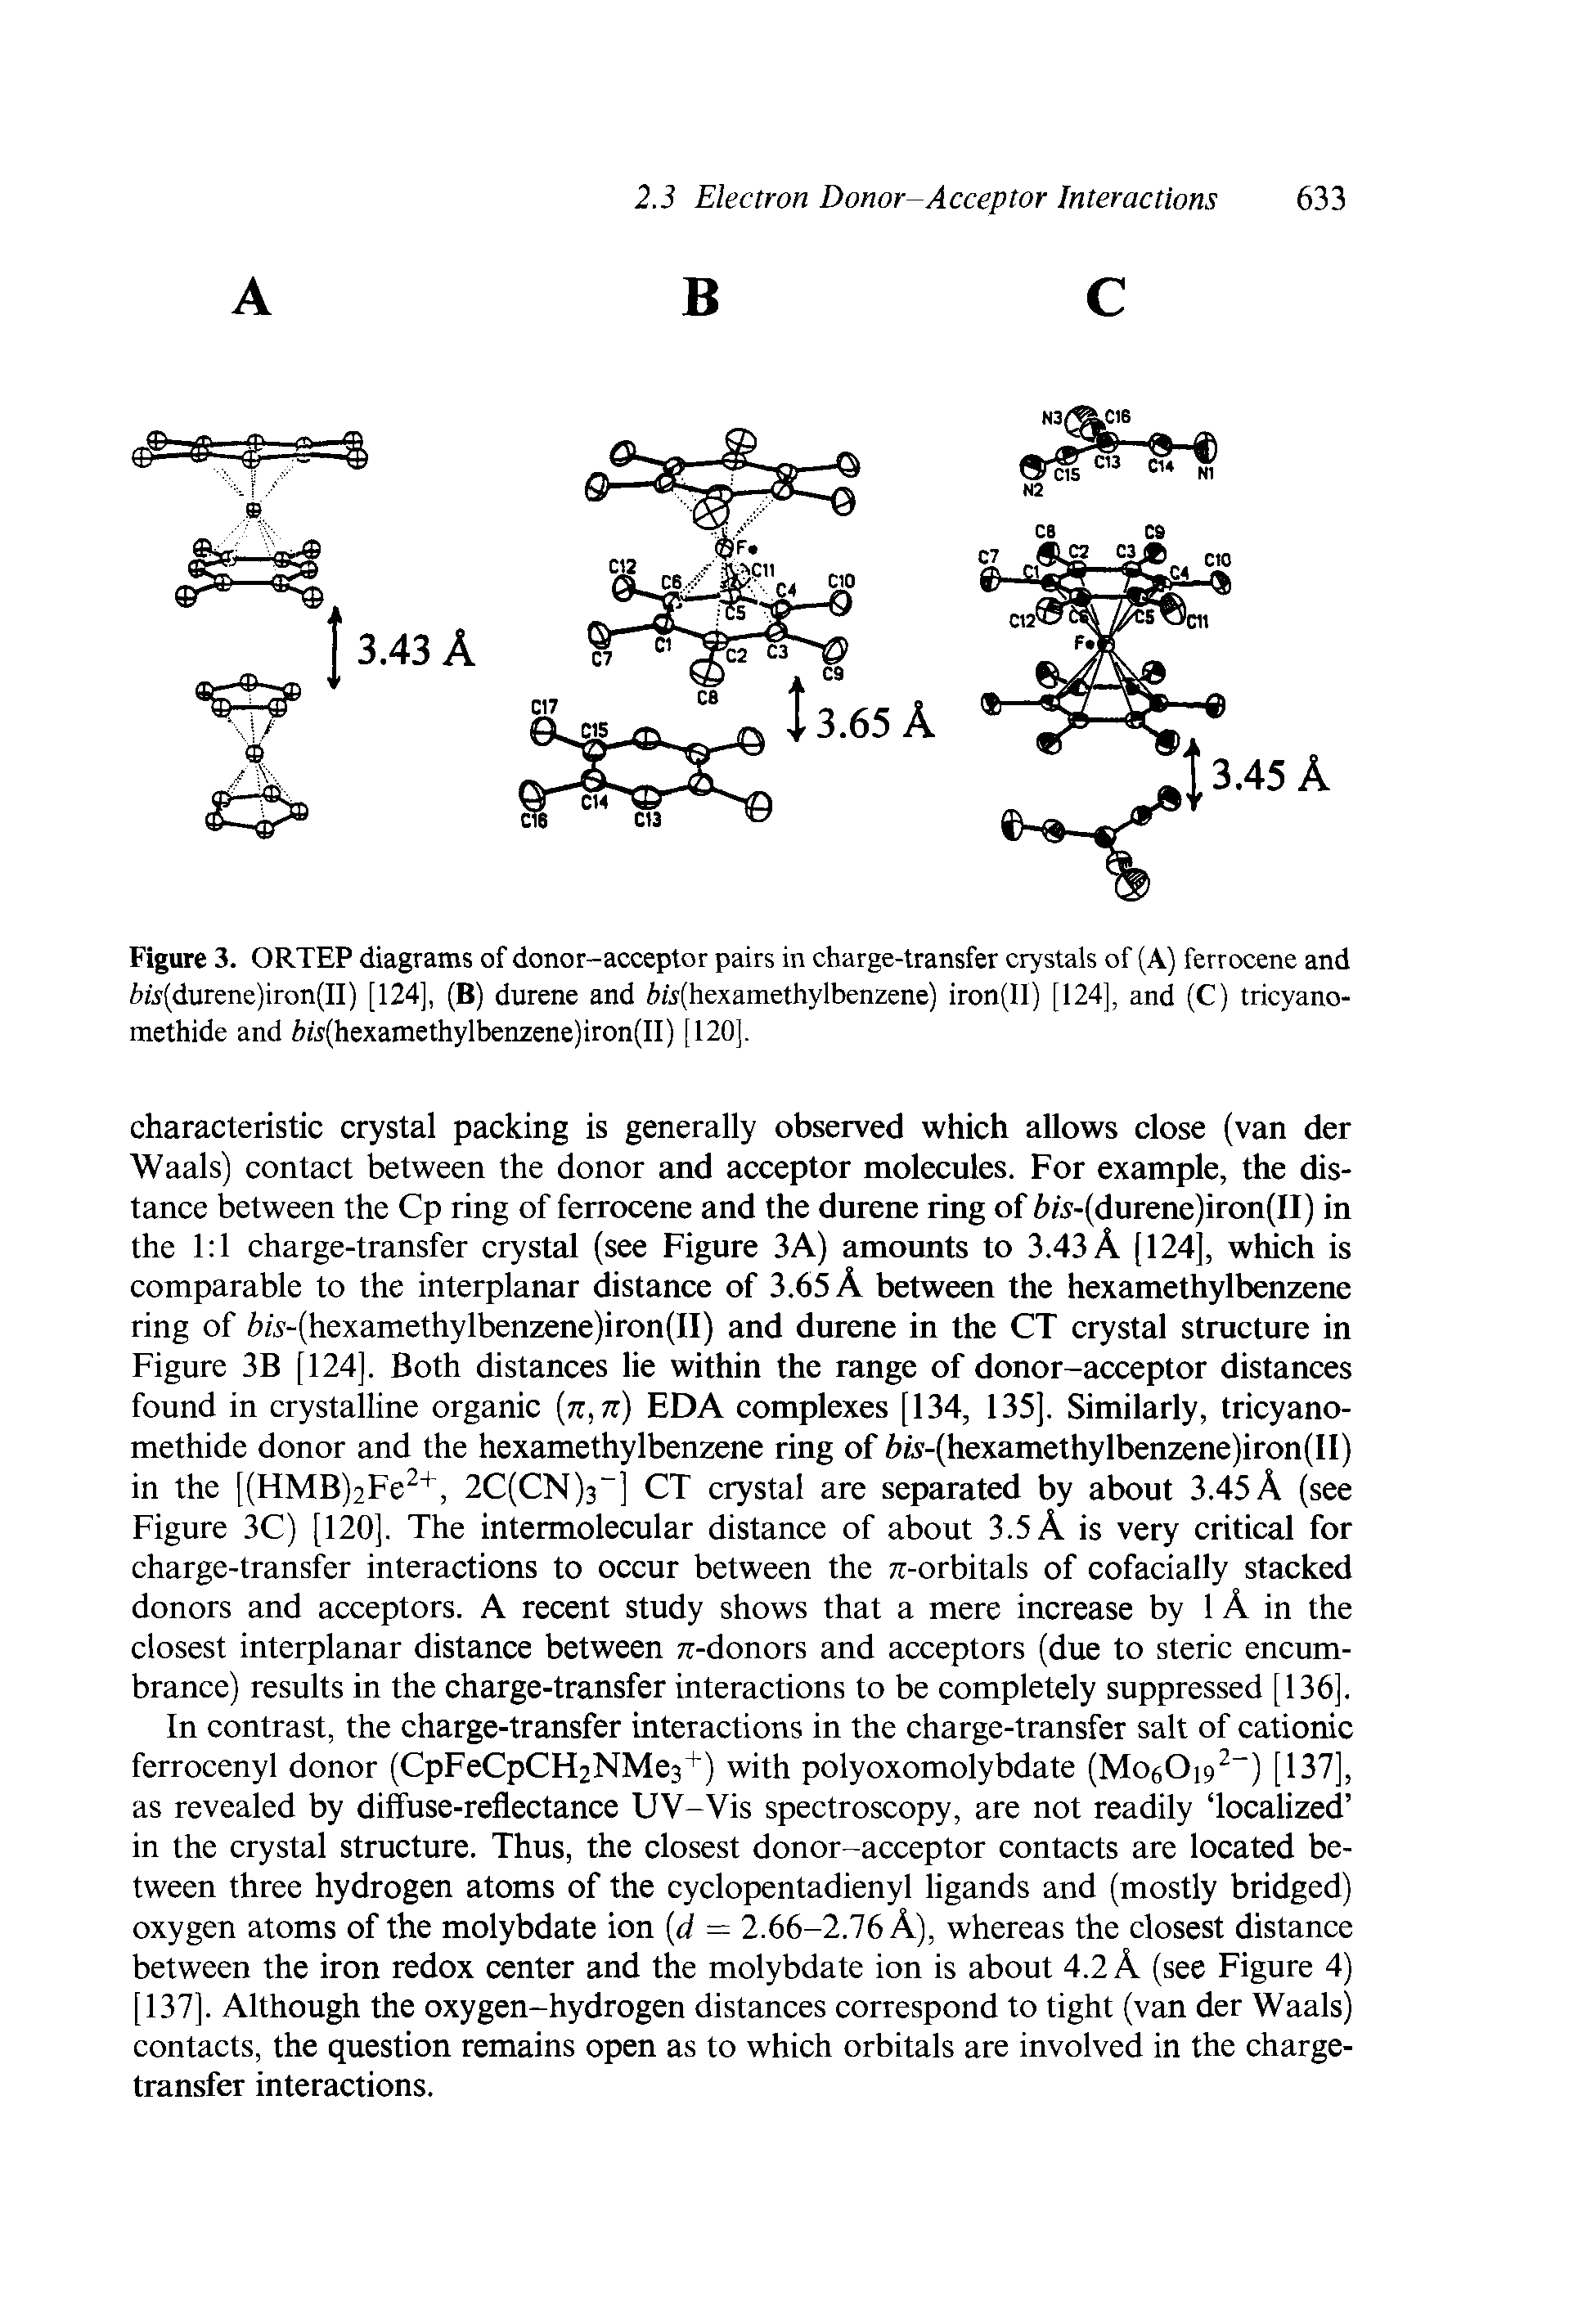 Figure 3. ORTEP diagrams of donor-acceptor pairs in charge-transfer crystals of (A) ferrocene and 6w(durene)iron(II) [124], (B) durene and i u(hexamethylbenzene) iron(II) [124], and (C) tricyano-methide and 6M(hexamethylbenzene)iron(II) [120],...